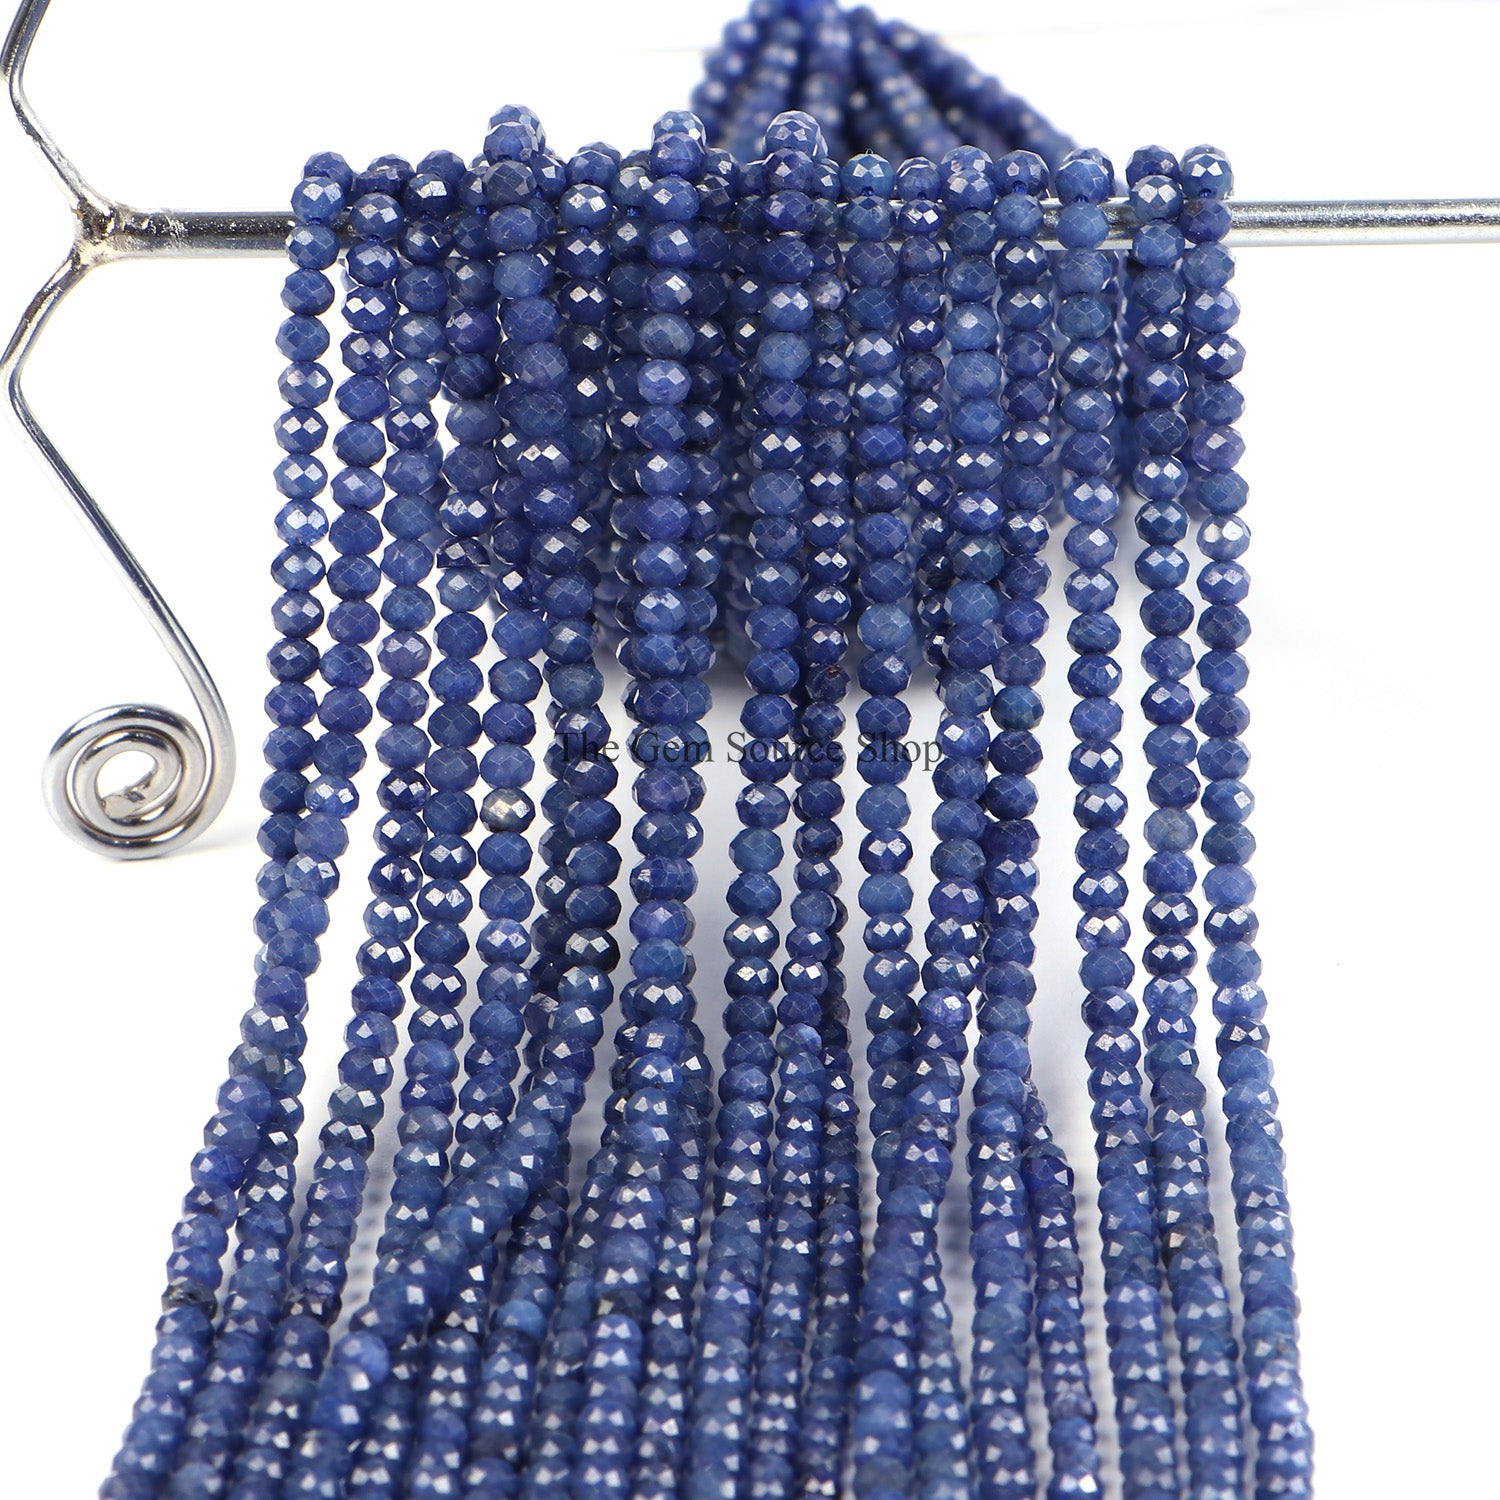 Blue Sapphire Beads, Blue sapphire Faceted Beads, Blue Sapphire Rondelle Shape Beads, Wholesale Beads